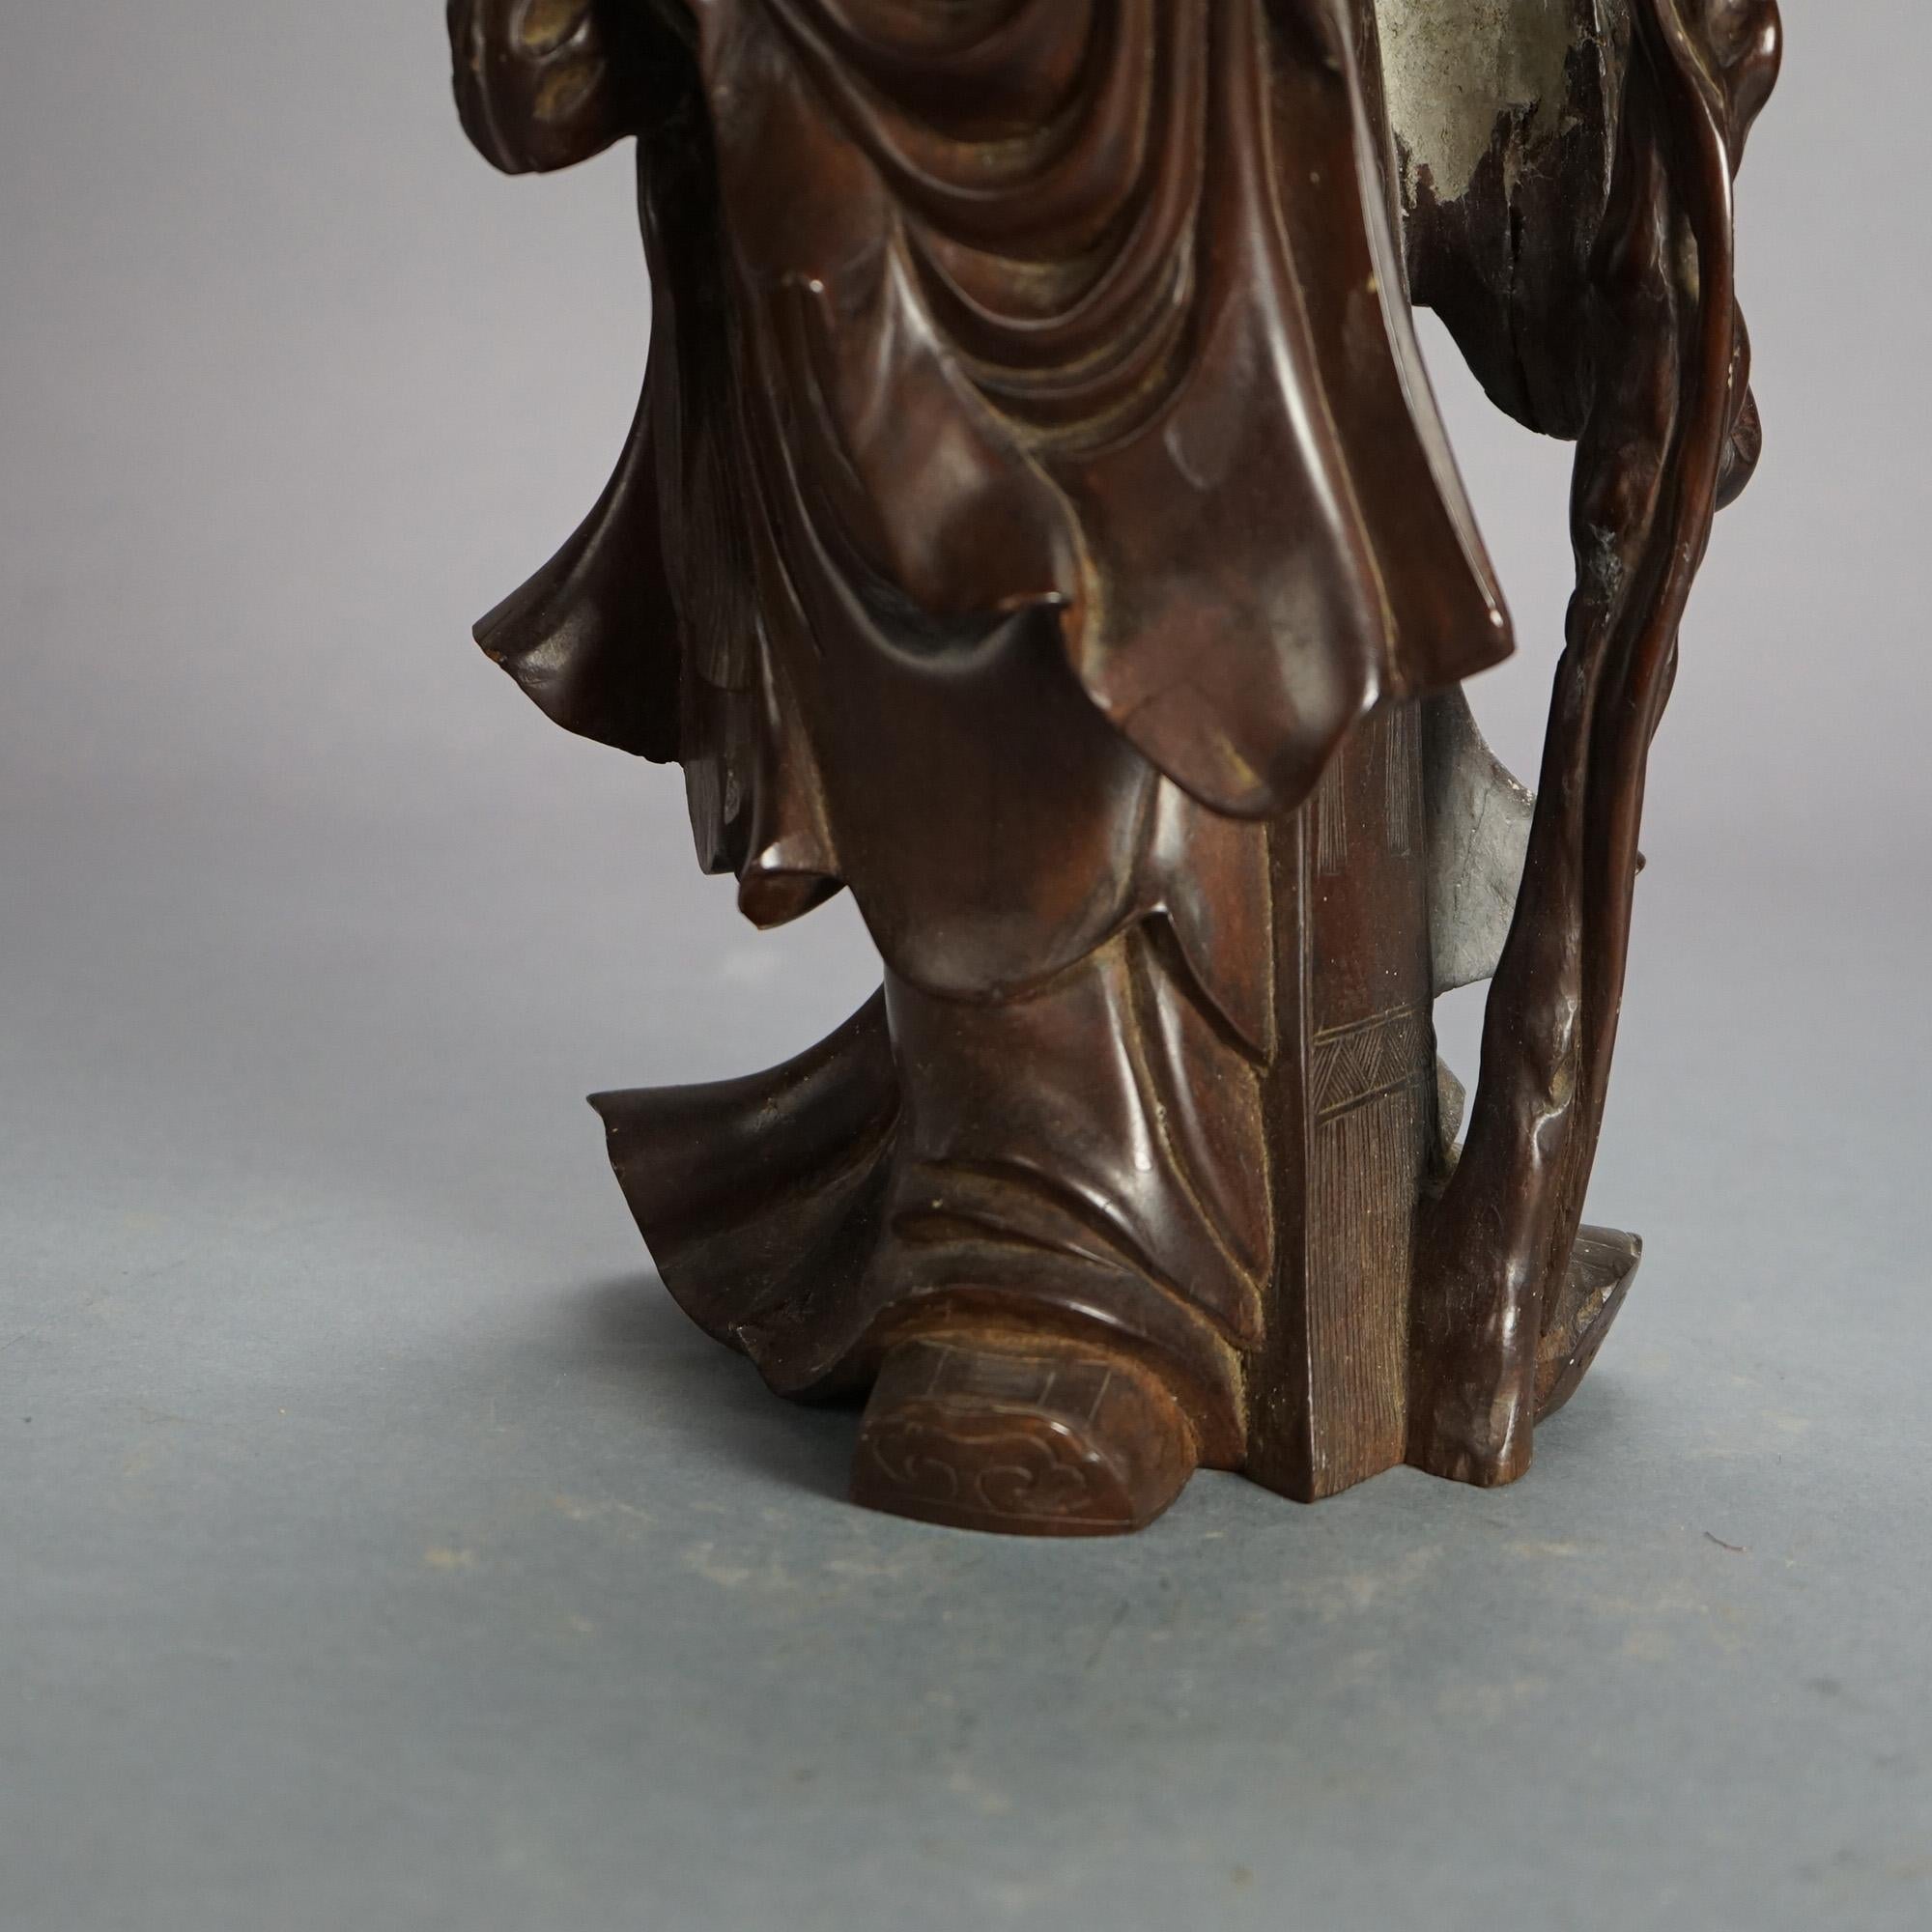 Asian Hand-Carved Rosewood Standing Buddha or Wise Man Figure C1940

Measures - 16.75